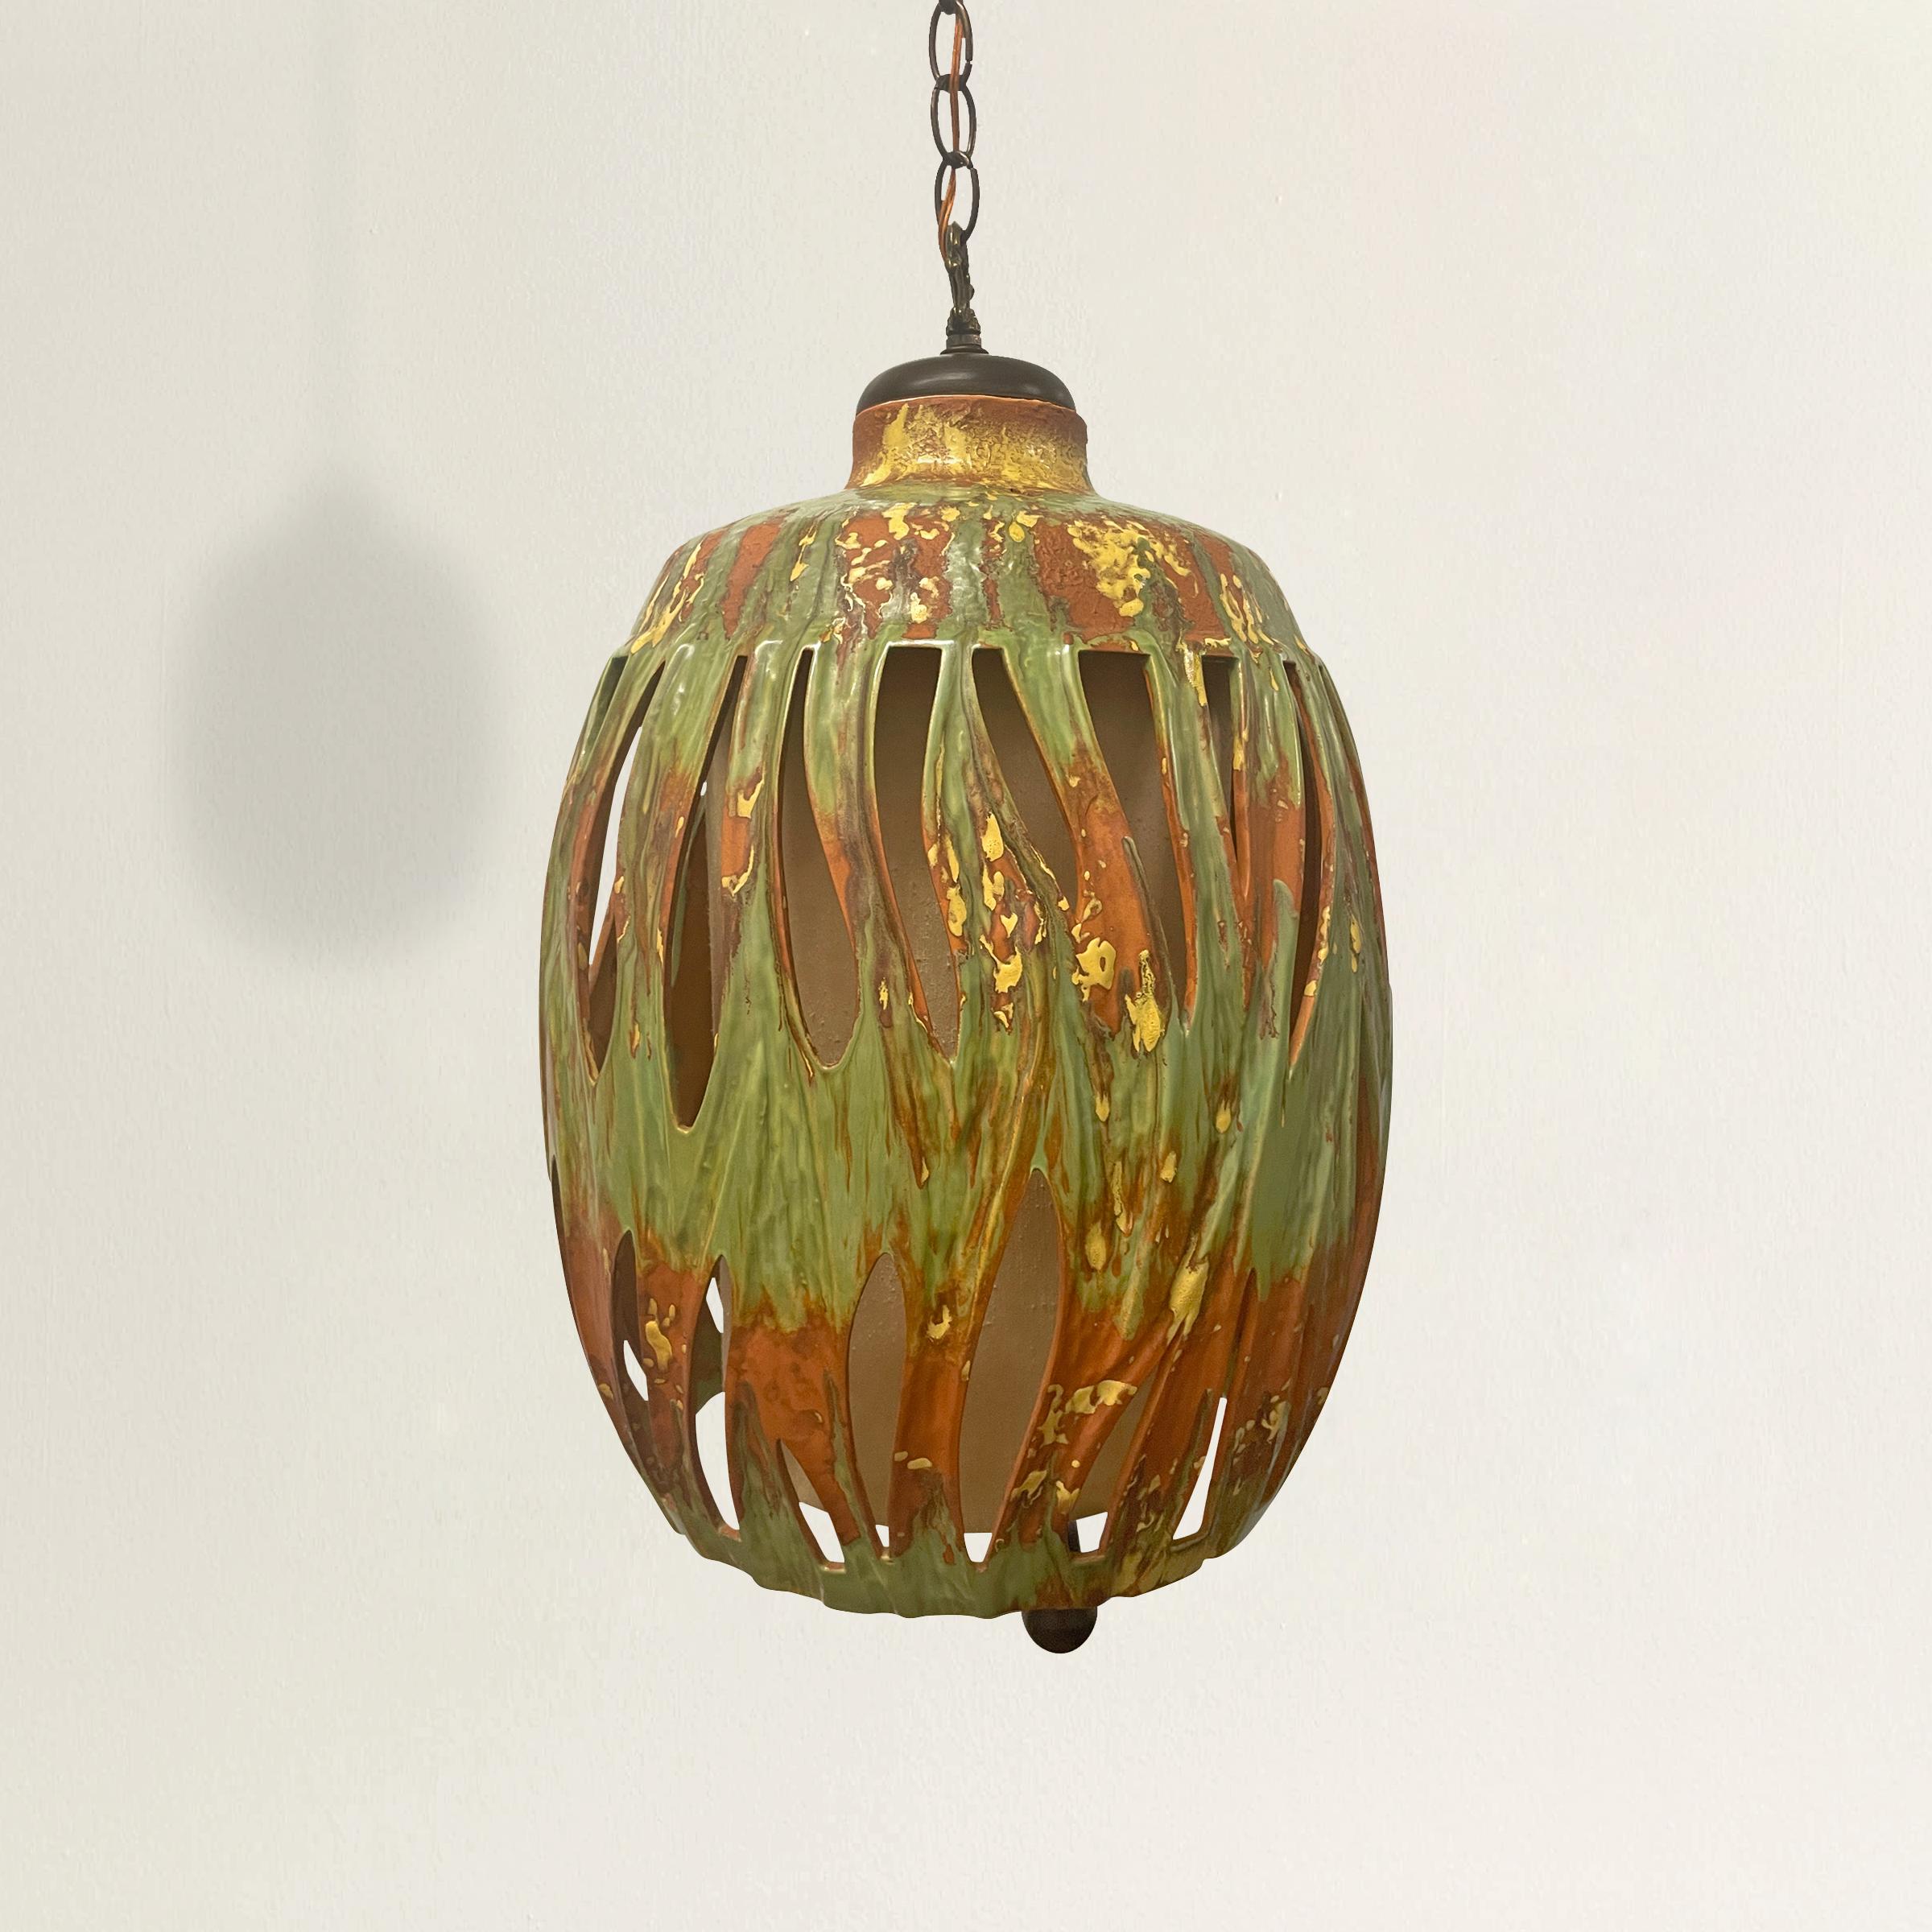 A groovy mid-20th century American terracotta lantern with the best green and yellow splatter glaze, a cylindrical raw silk shade, and a chunky wood pull chain. Electrified for US. Approximately 6 feet of lead wire and chain included.